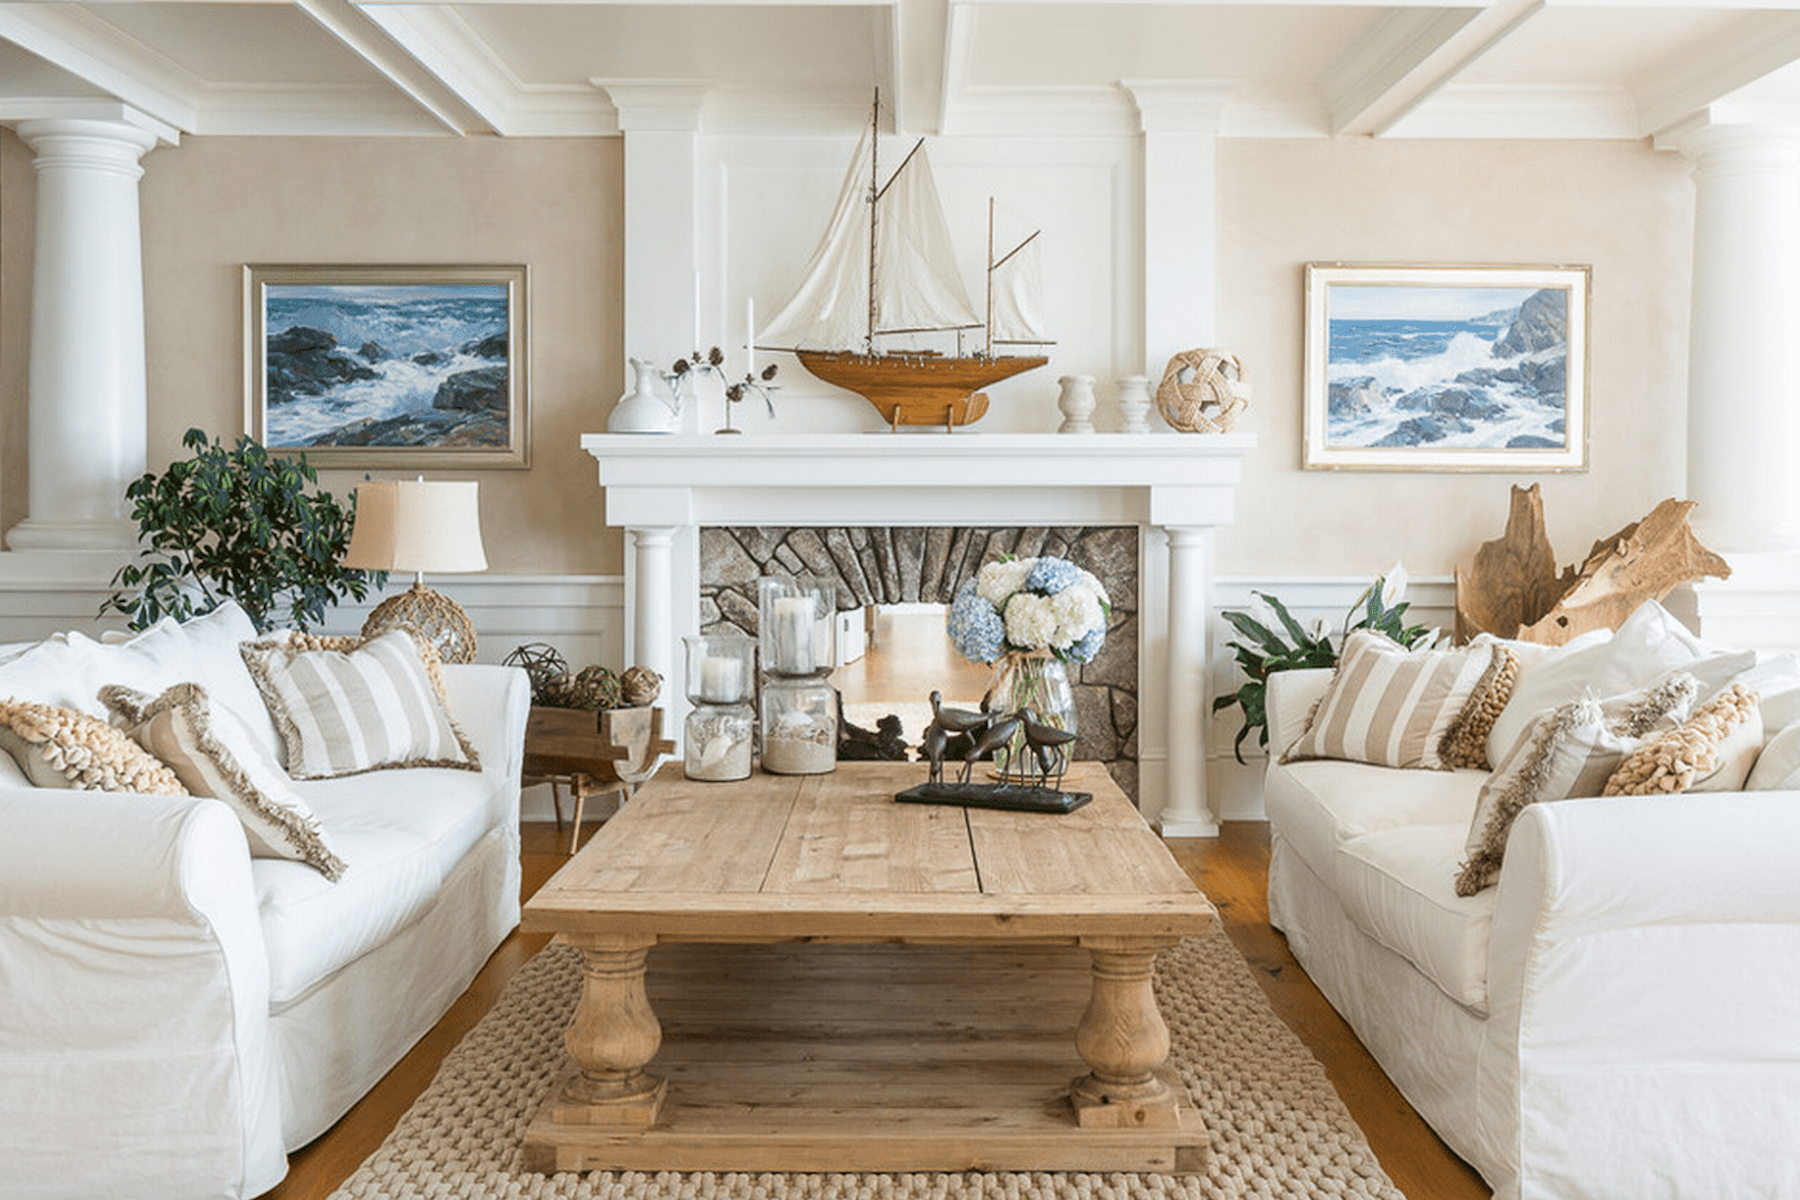 Get Beachy! 3 Ways to Infuse the Coastal Look in your Living Room